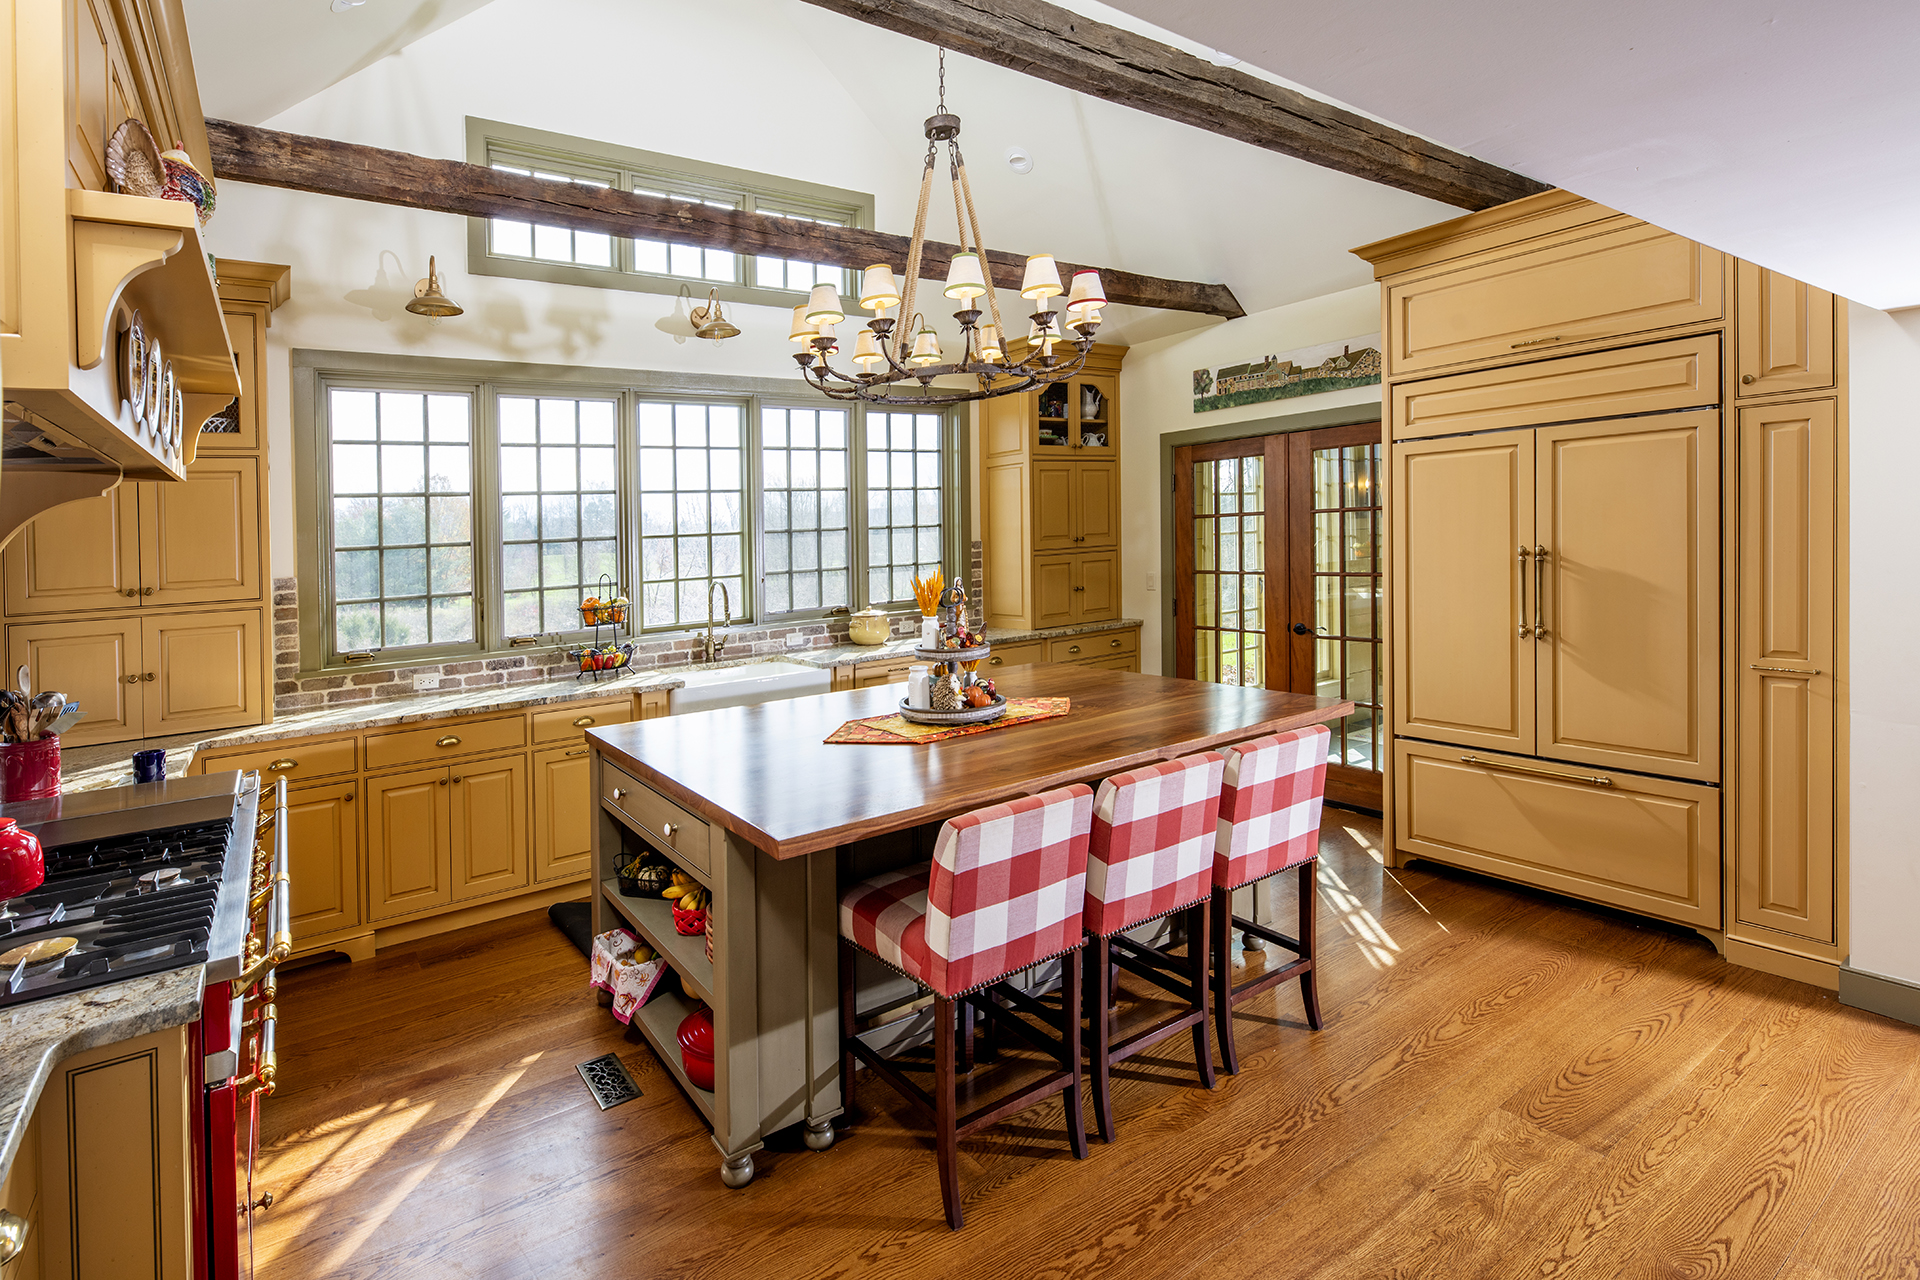 Doylestown Kitchen Remodel for Historic Restoration and Addition from neighboring Buckingham